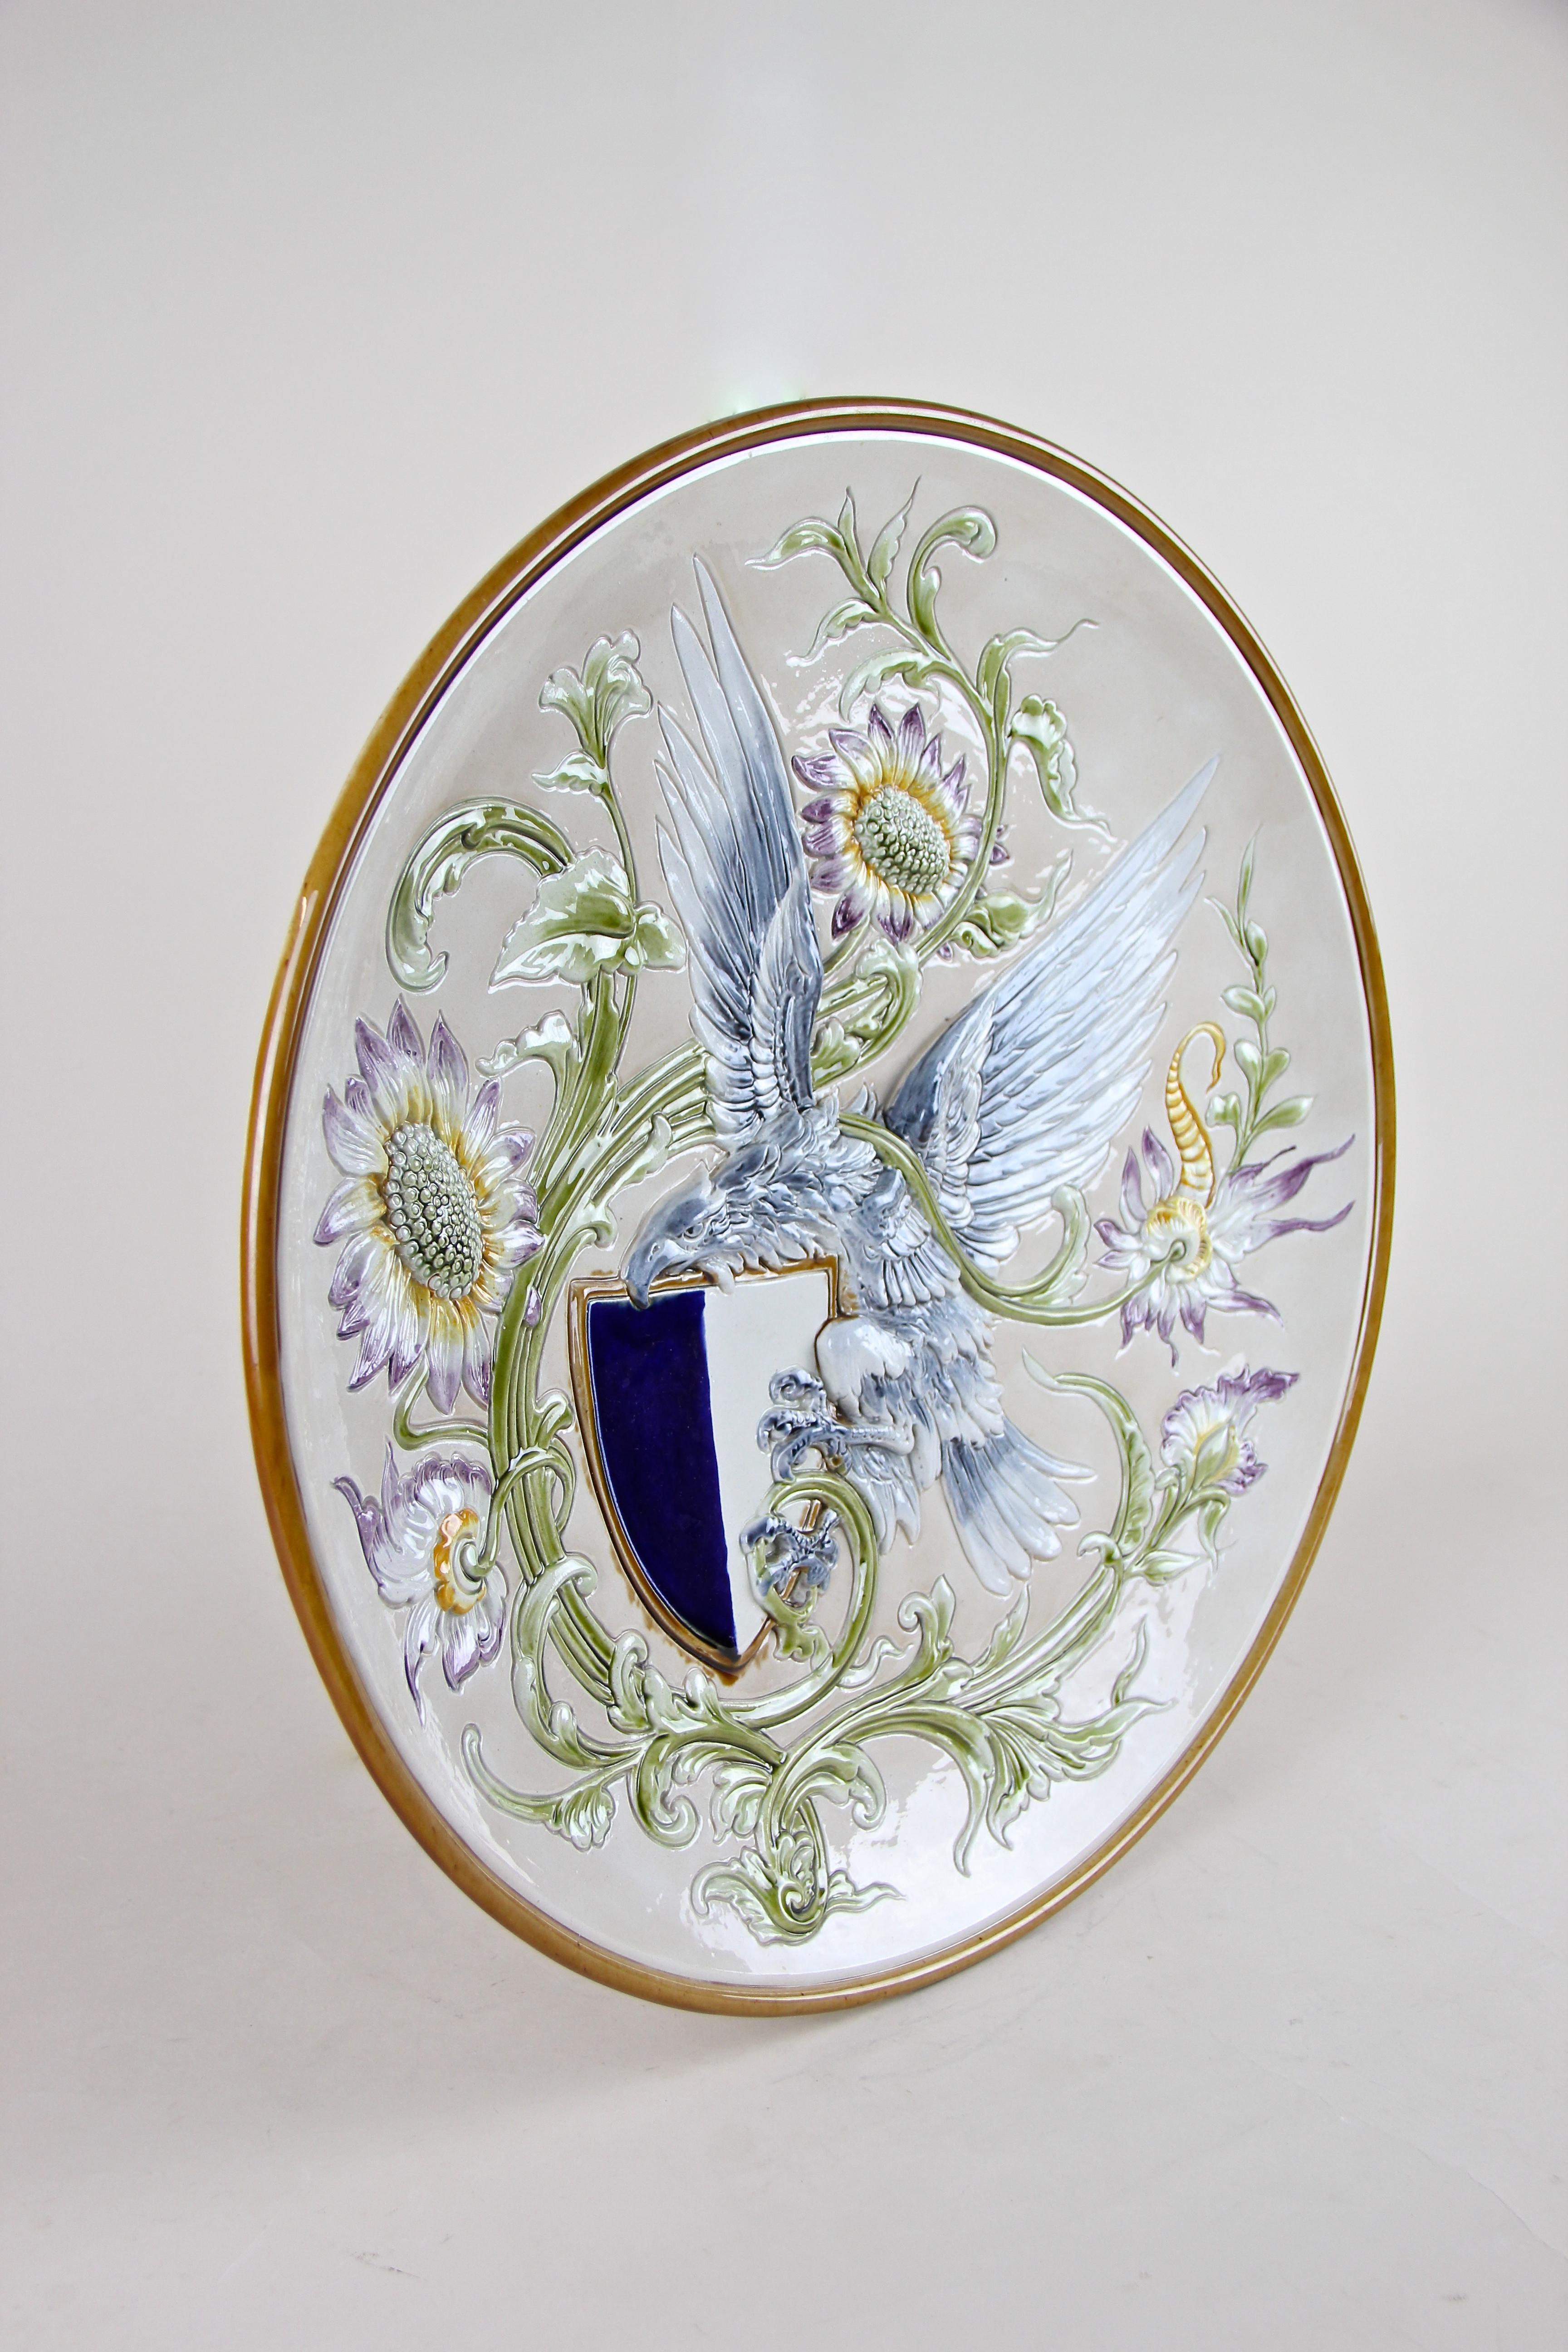 Outstanding Majolica wall plate out of the famous workshops of Wilhelm Schiller & Son in Bohemia from around 1890. Adorned by a fantastic worked blue eagle holding a blue/white coat of arms surrounded by a gorgeous floral design in relief this late